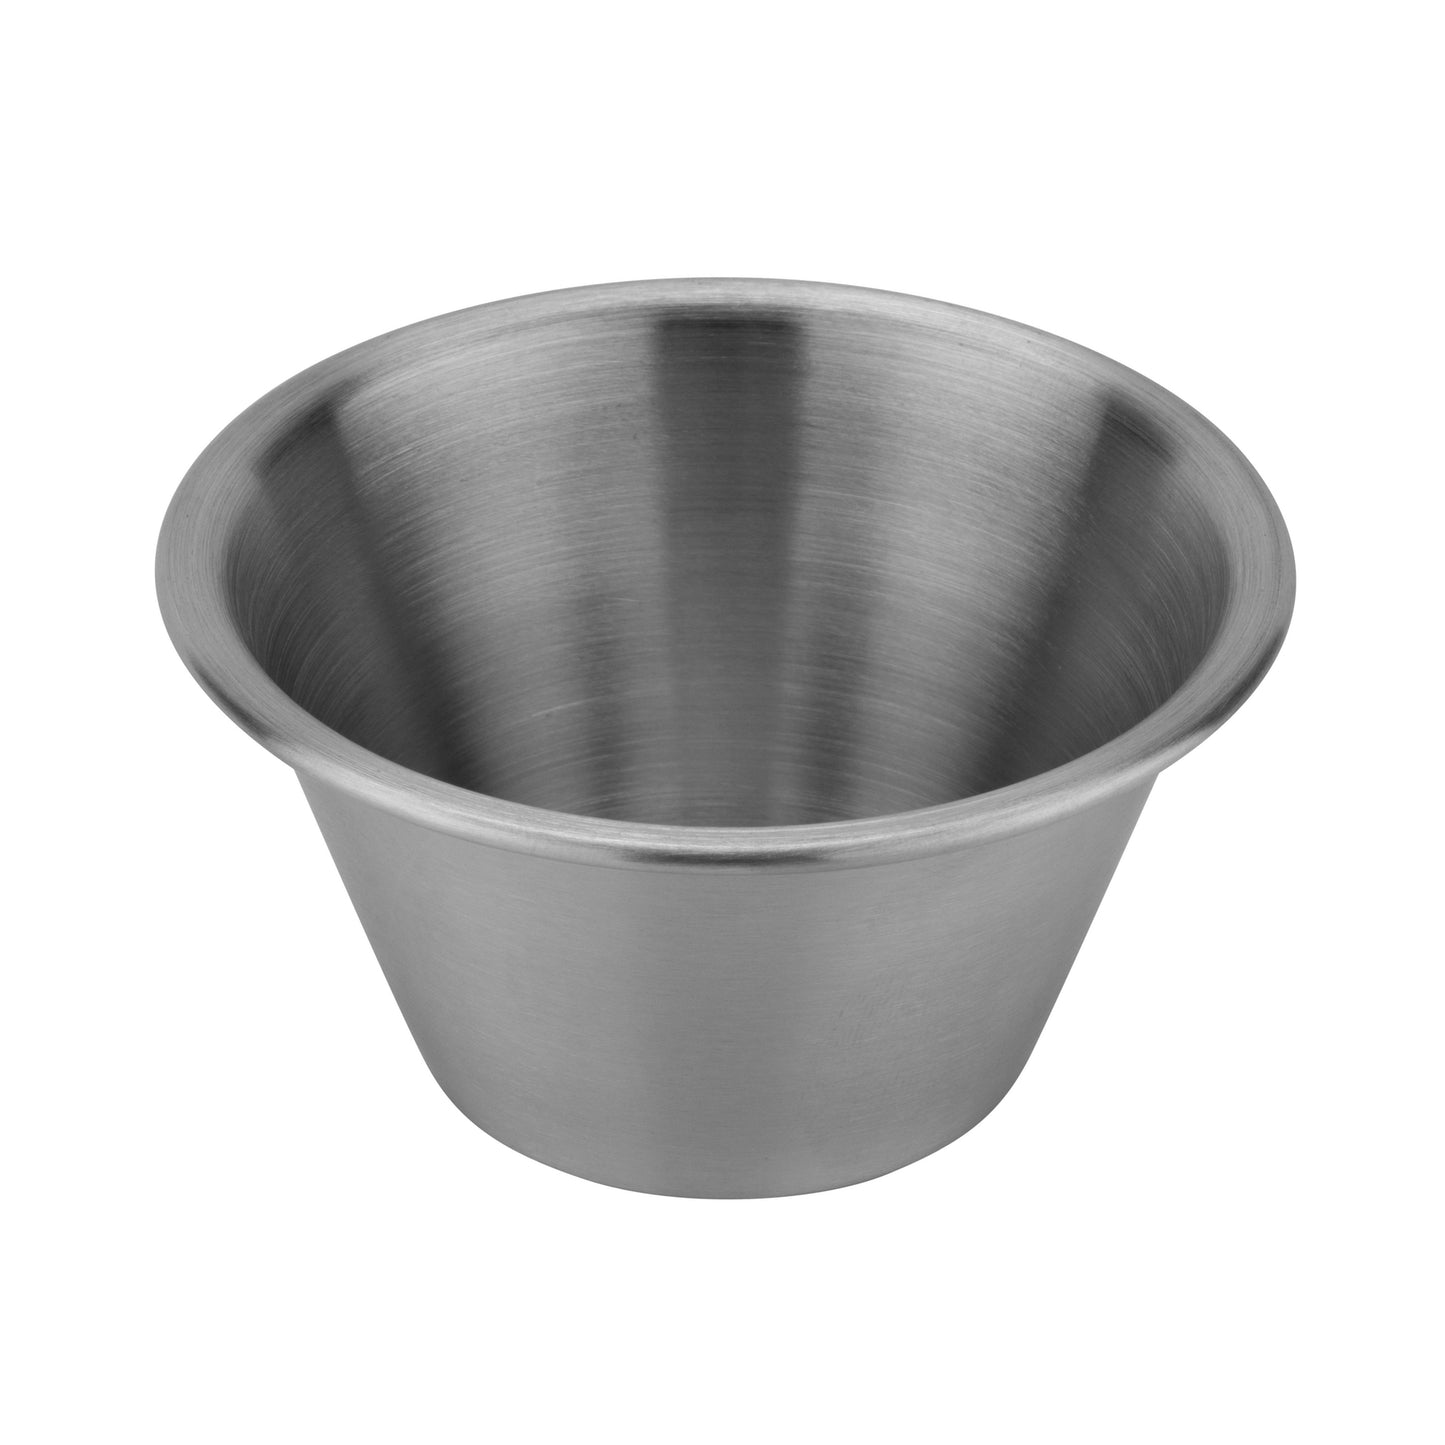 6 oz. Condiment Cup, 4" dia., 2.25" Tall